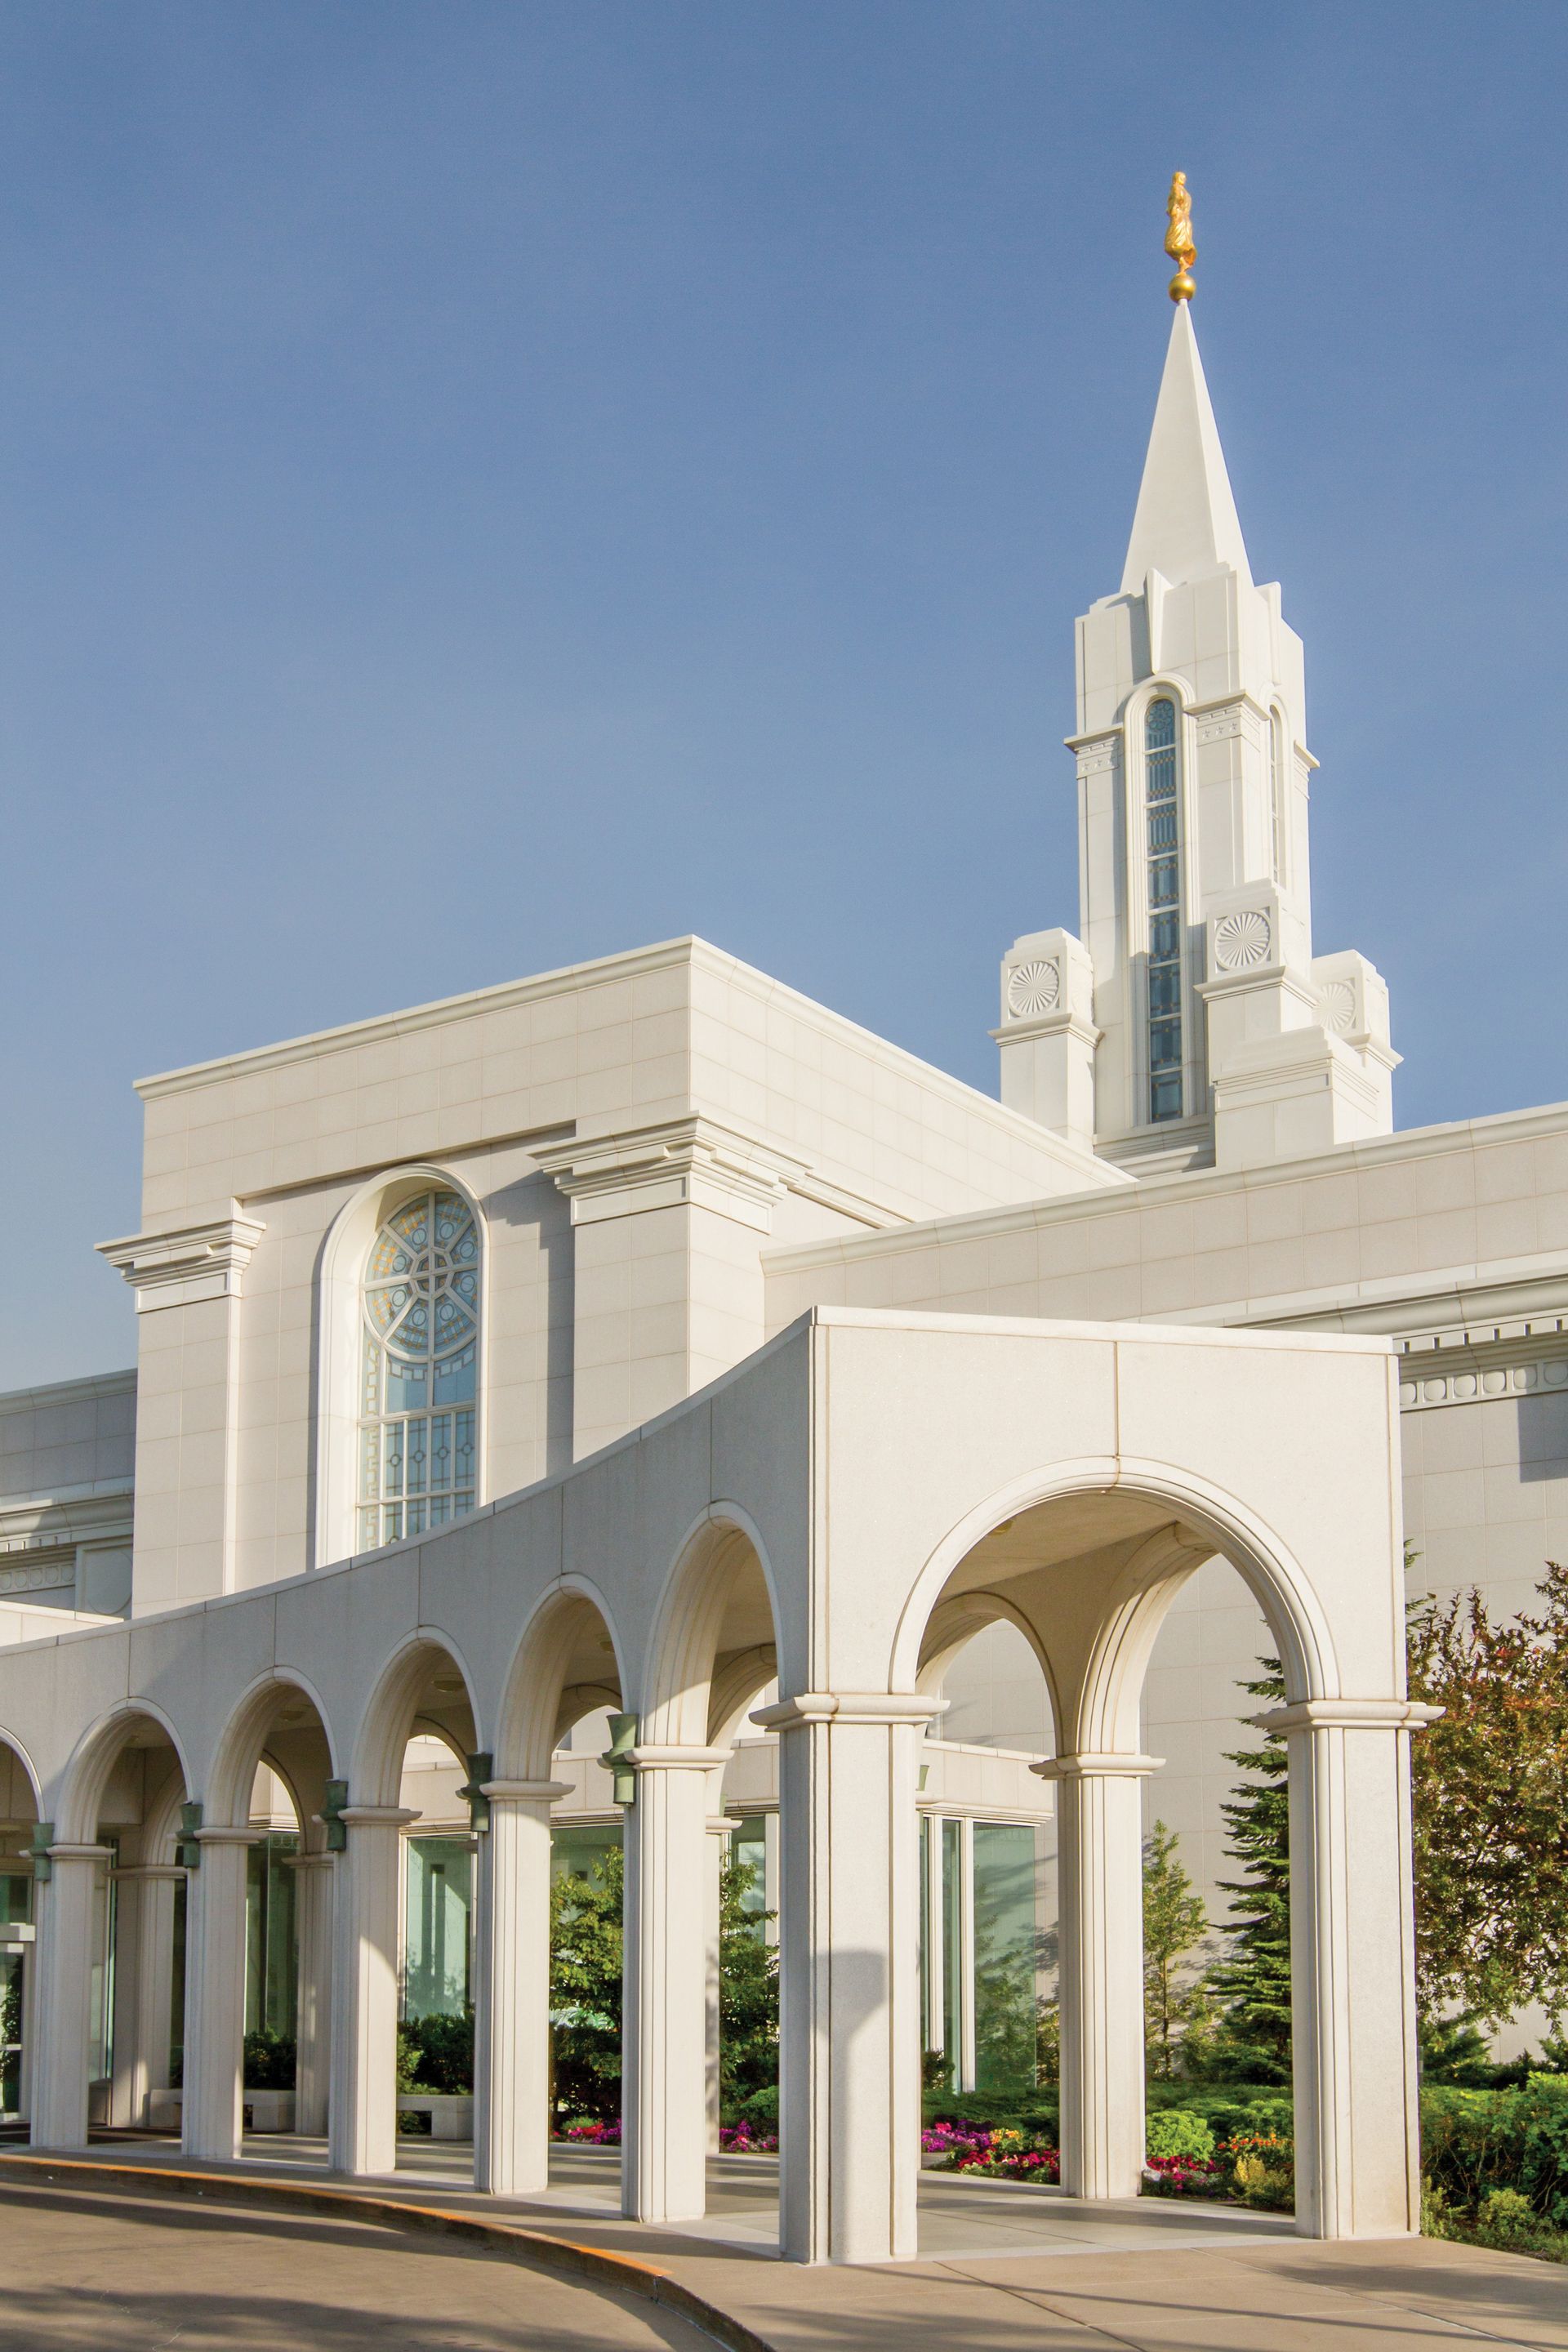 A portrait view of the entrance of the Bountiful Utah Temple.